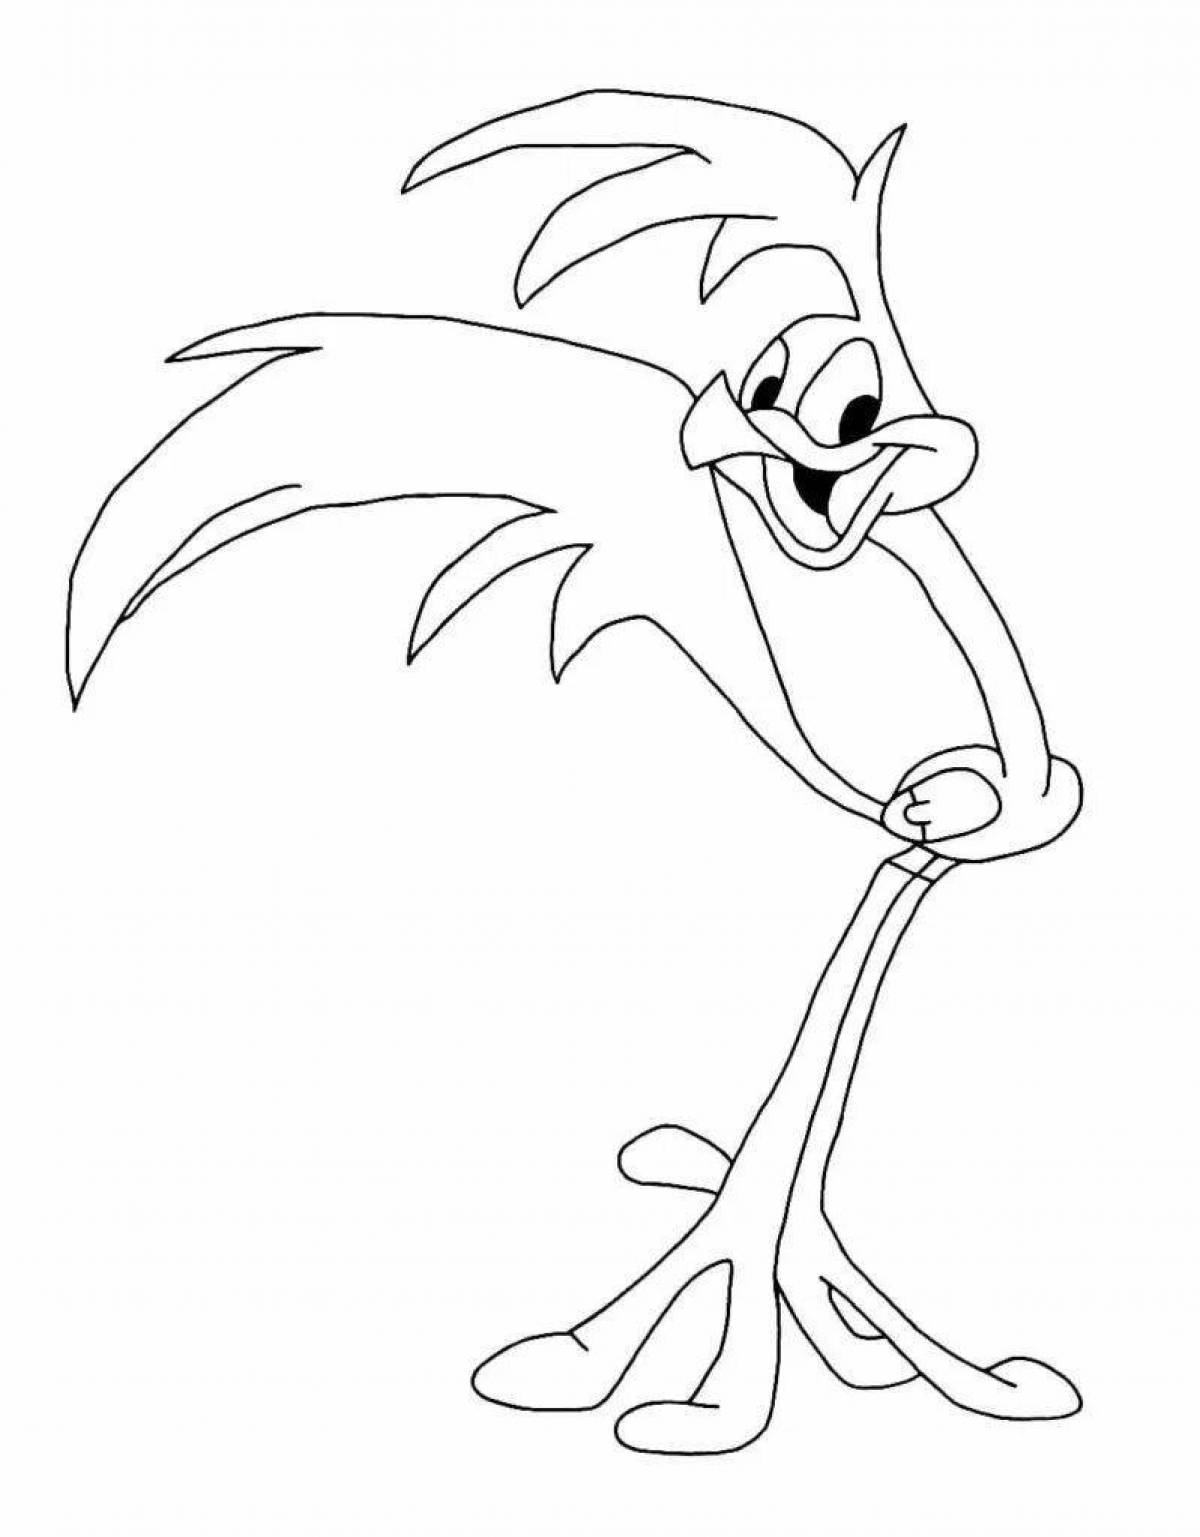 Colorful road runner coloring page